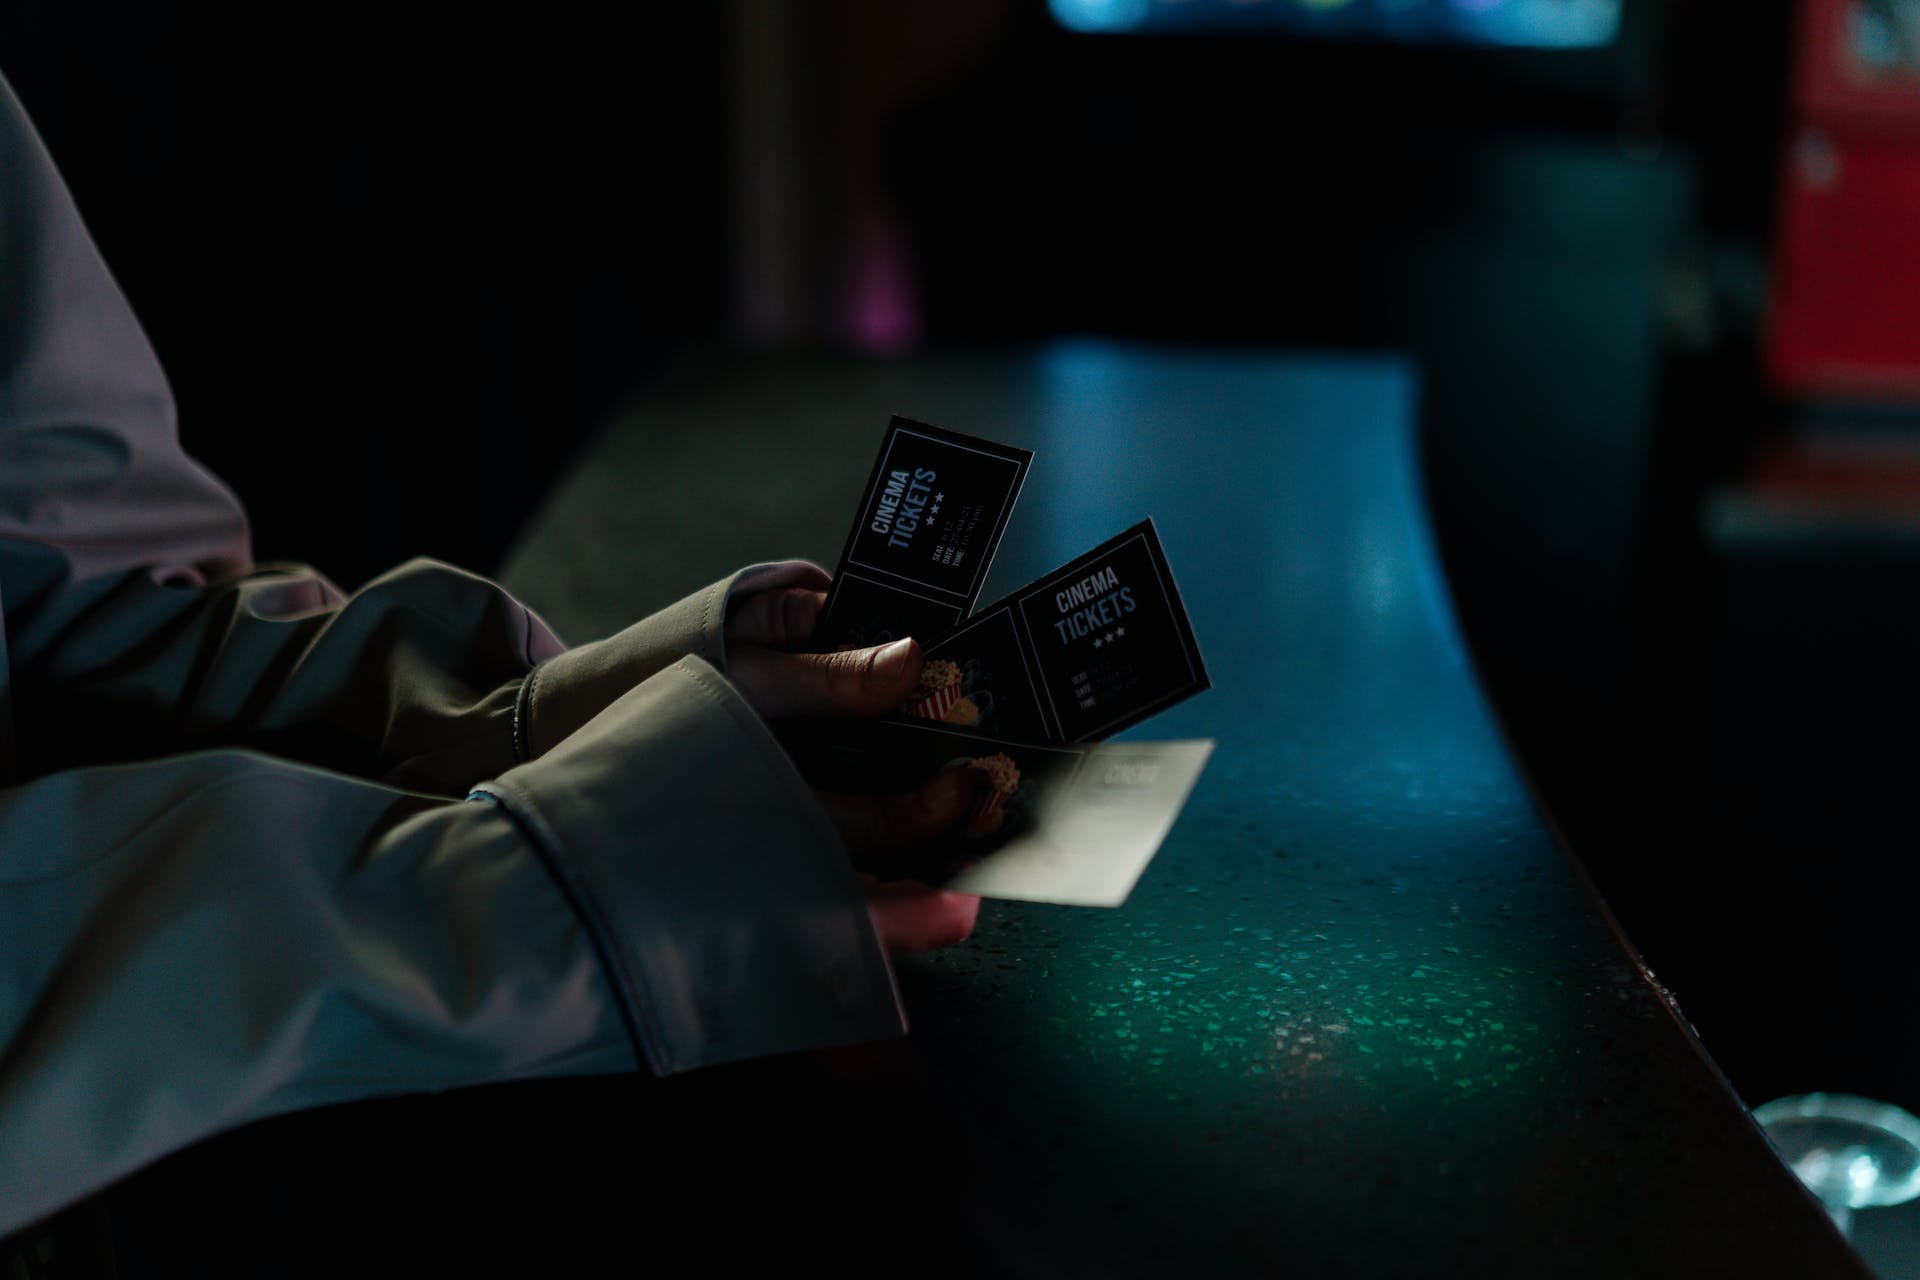 A person holding cinema tickets | Source: Pexels